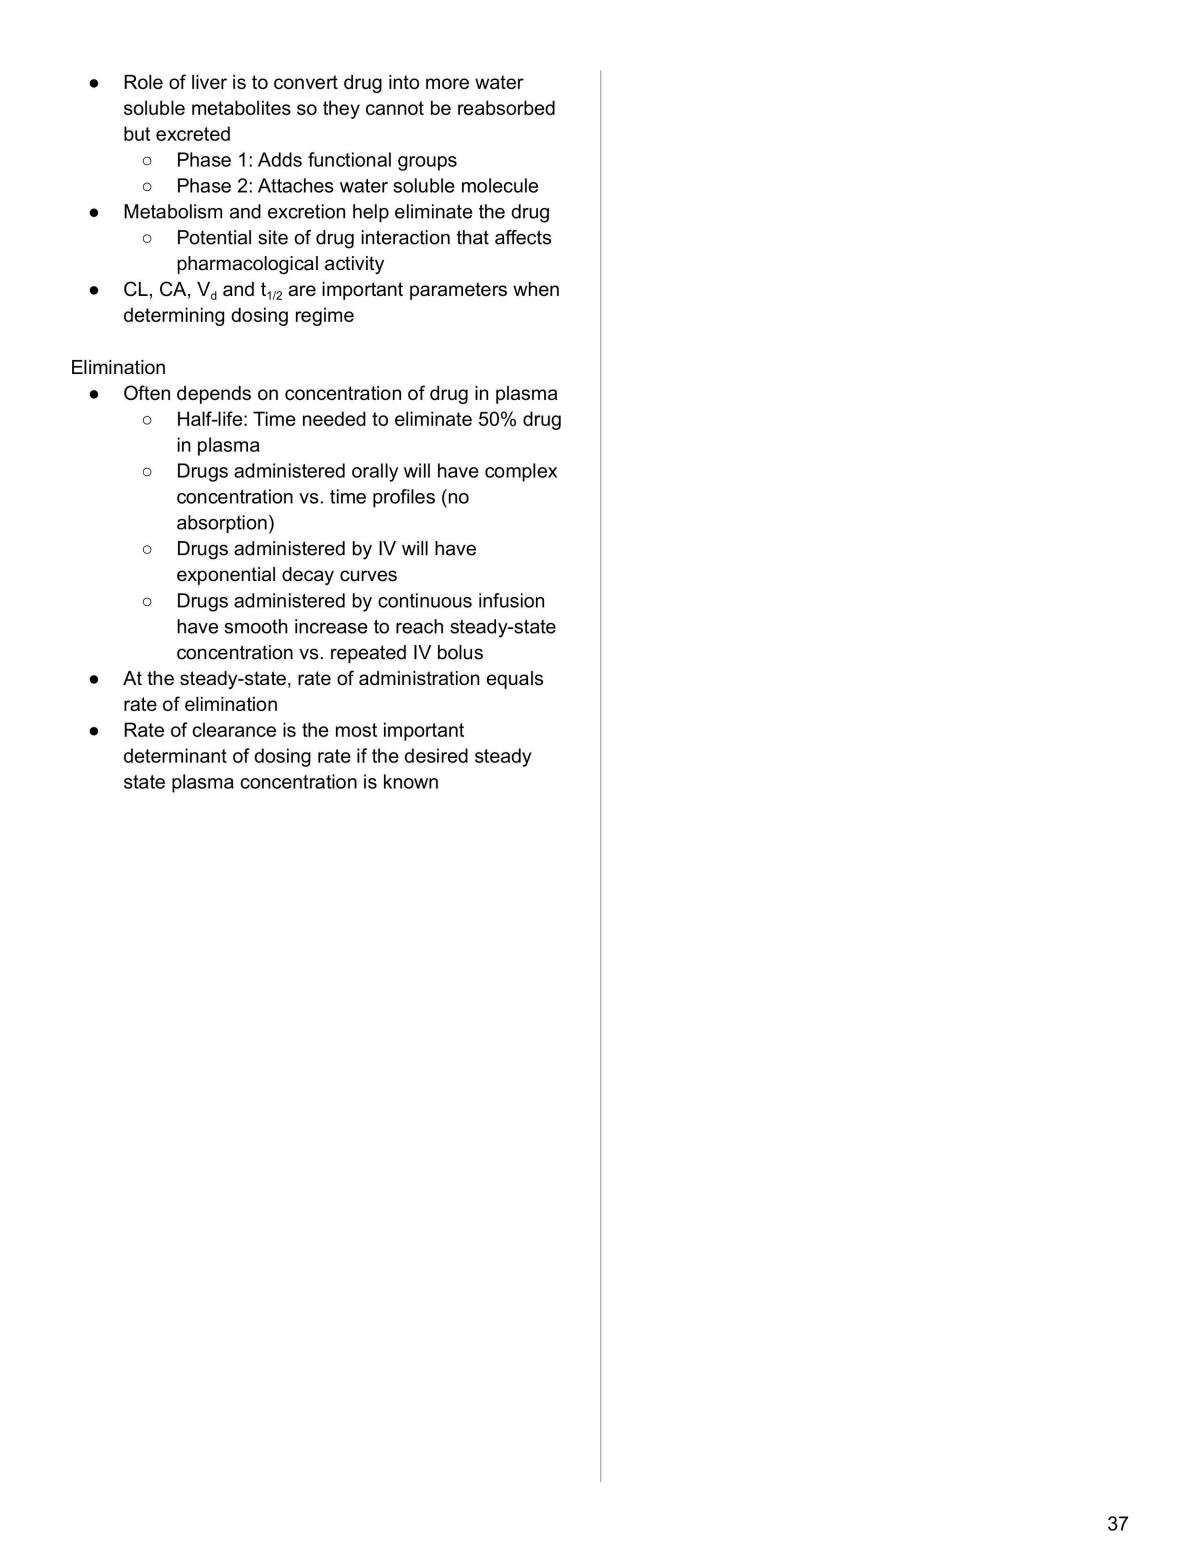 L1-18: PHRM20001 - Pharmacology - Page 37